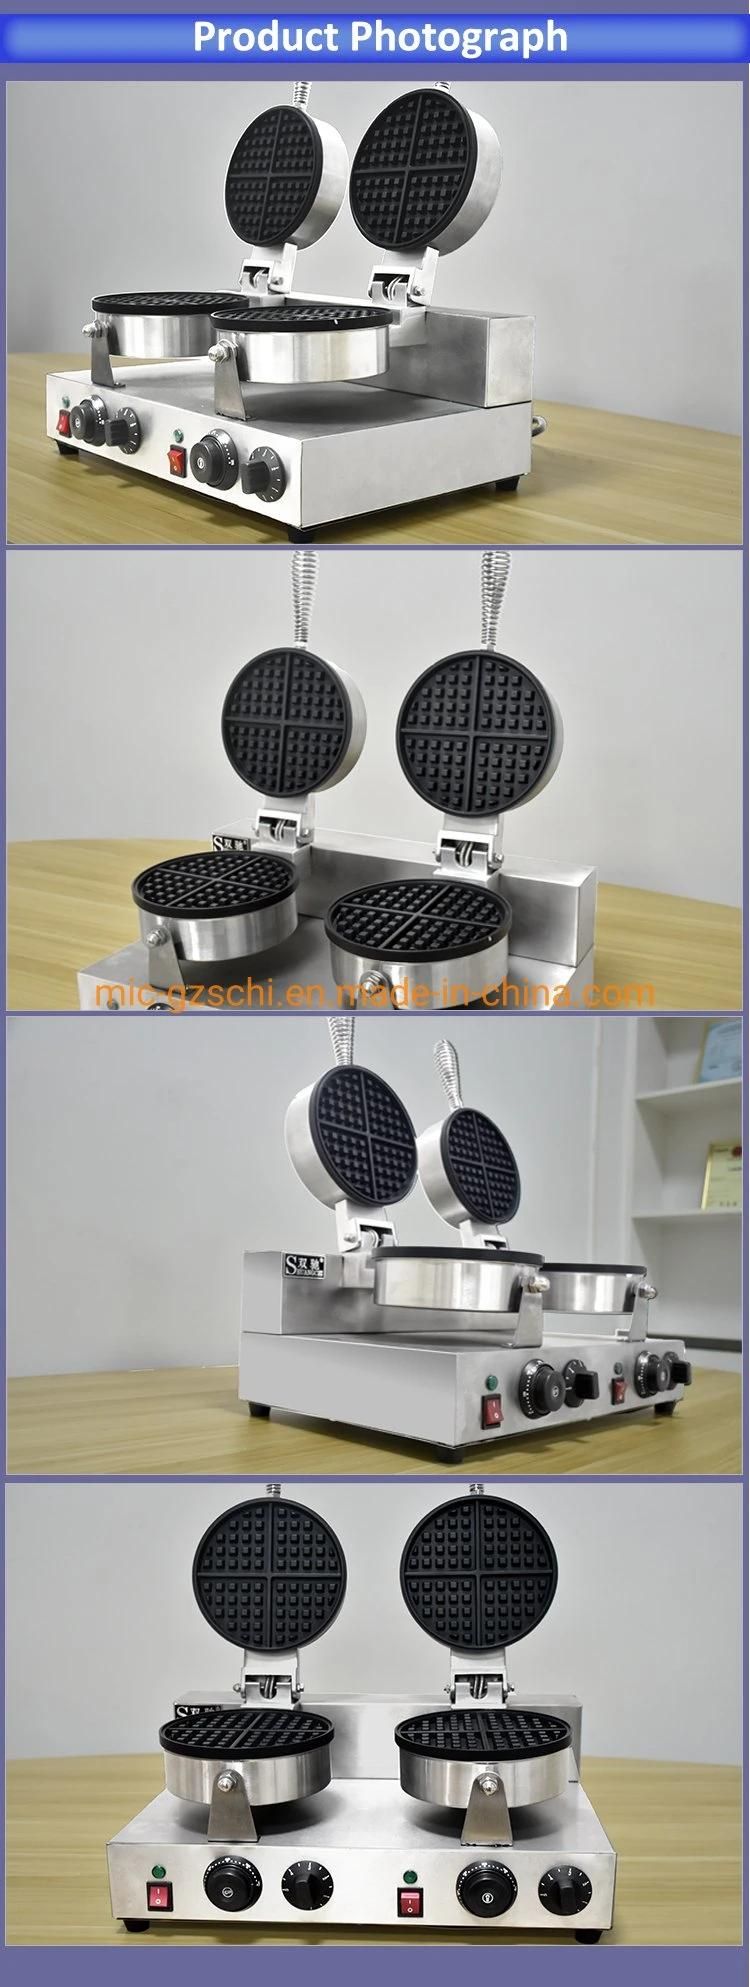 Double Head Waffle Bakers Waffle Machine Non-Stick Waffle Maker for Commercial Use